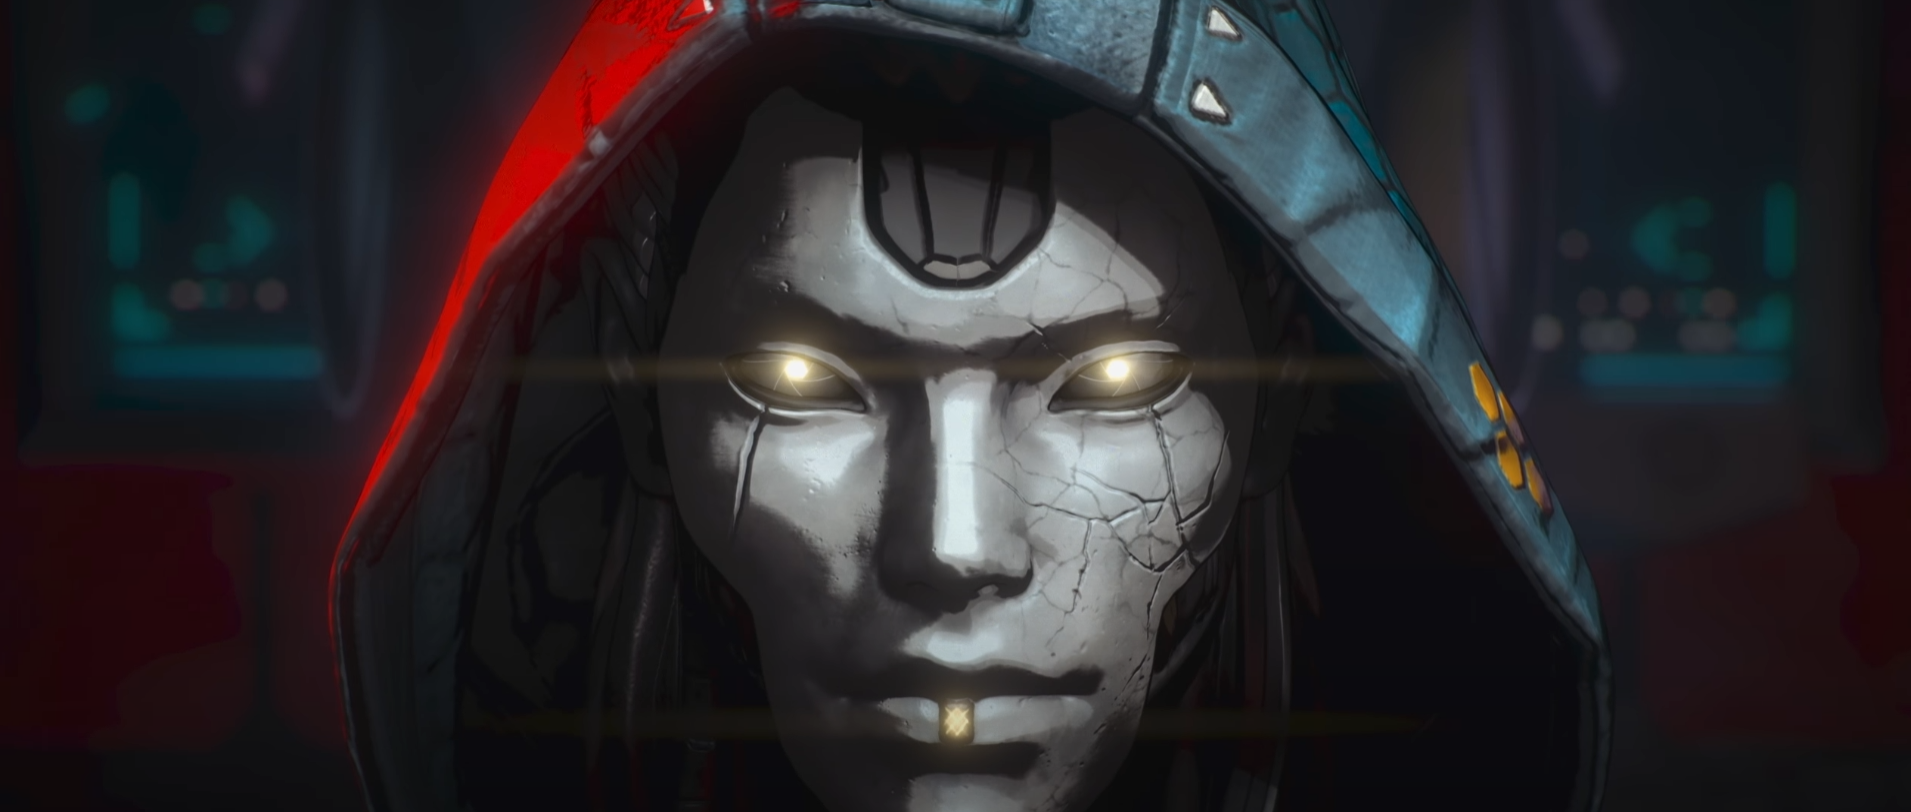 Ash from Titanfall in an Apex Legends teaser trailer